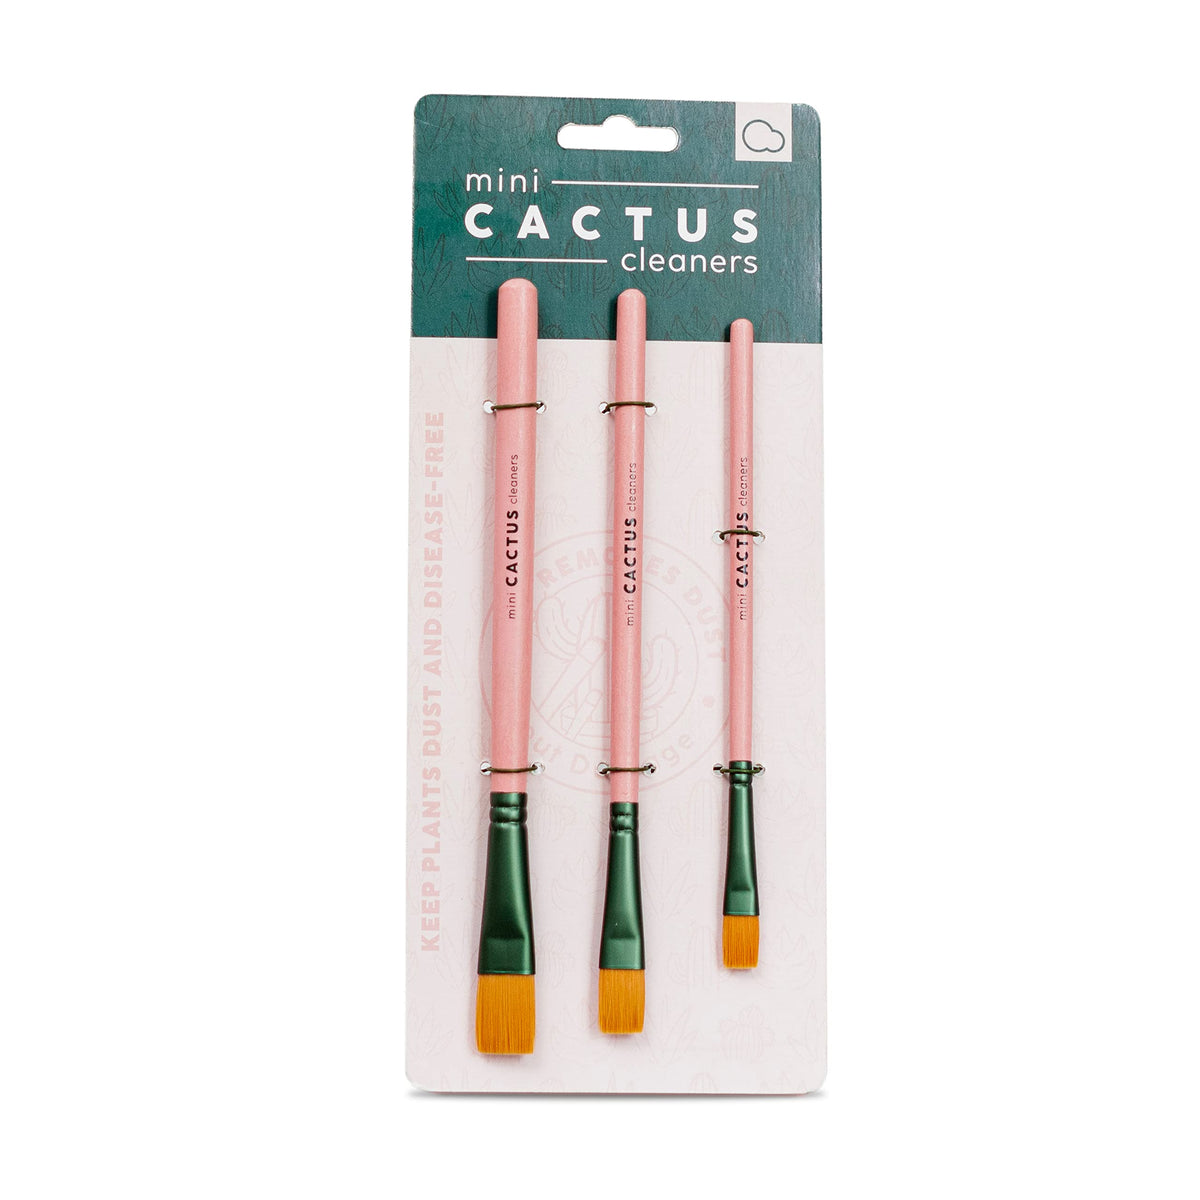 Bubblegum Stuff - Mini Cactus Cleaners - Garden Tools For House Plants, House Plant Accessory, Gardening Kit, Tool Set, Cleaning Brush Set, Gardening Tools